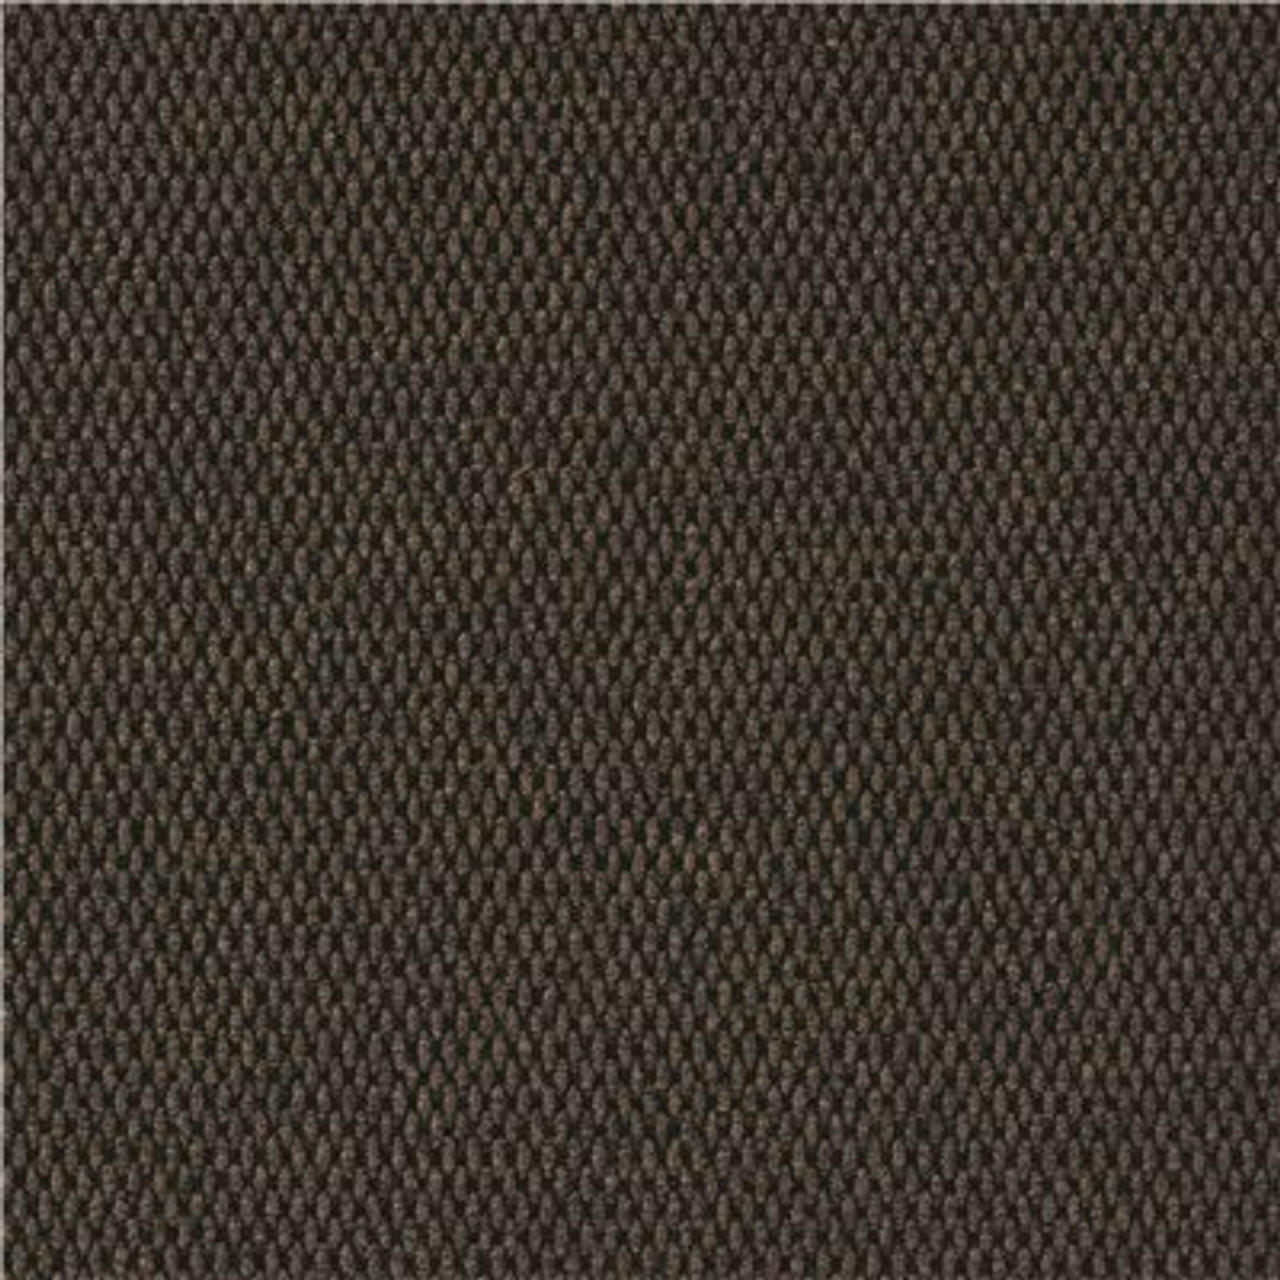 Foss Peel And Stick Modular Mat Hobnail Mahogany 18 In. X 18 In. Indoor/Outdoor Carpet Tile (10 Tiles/Case)